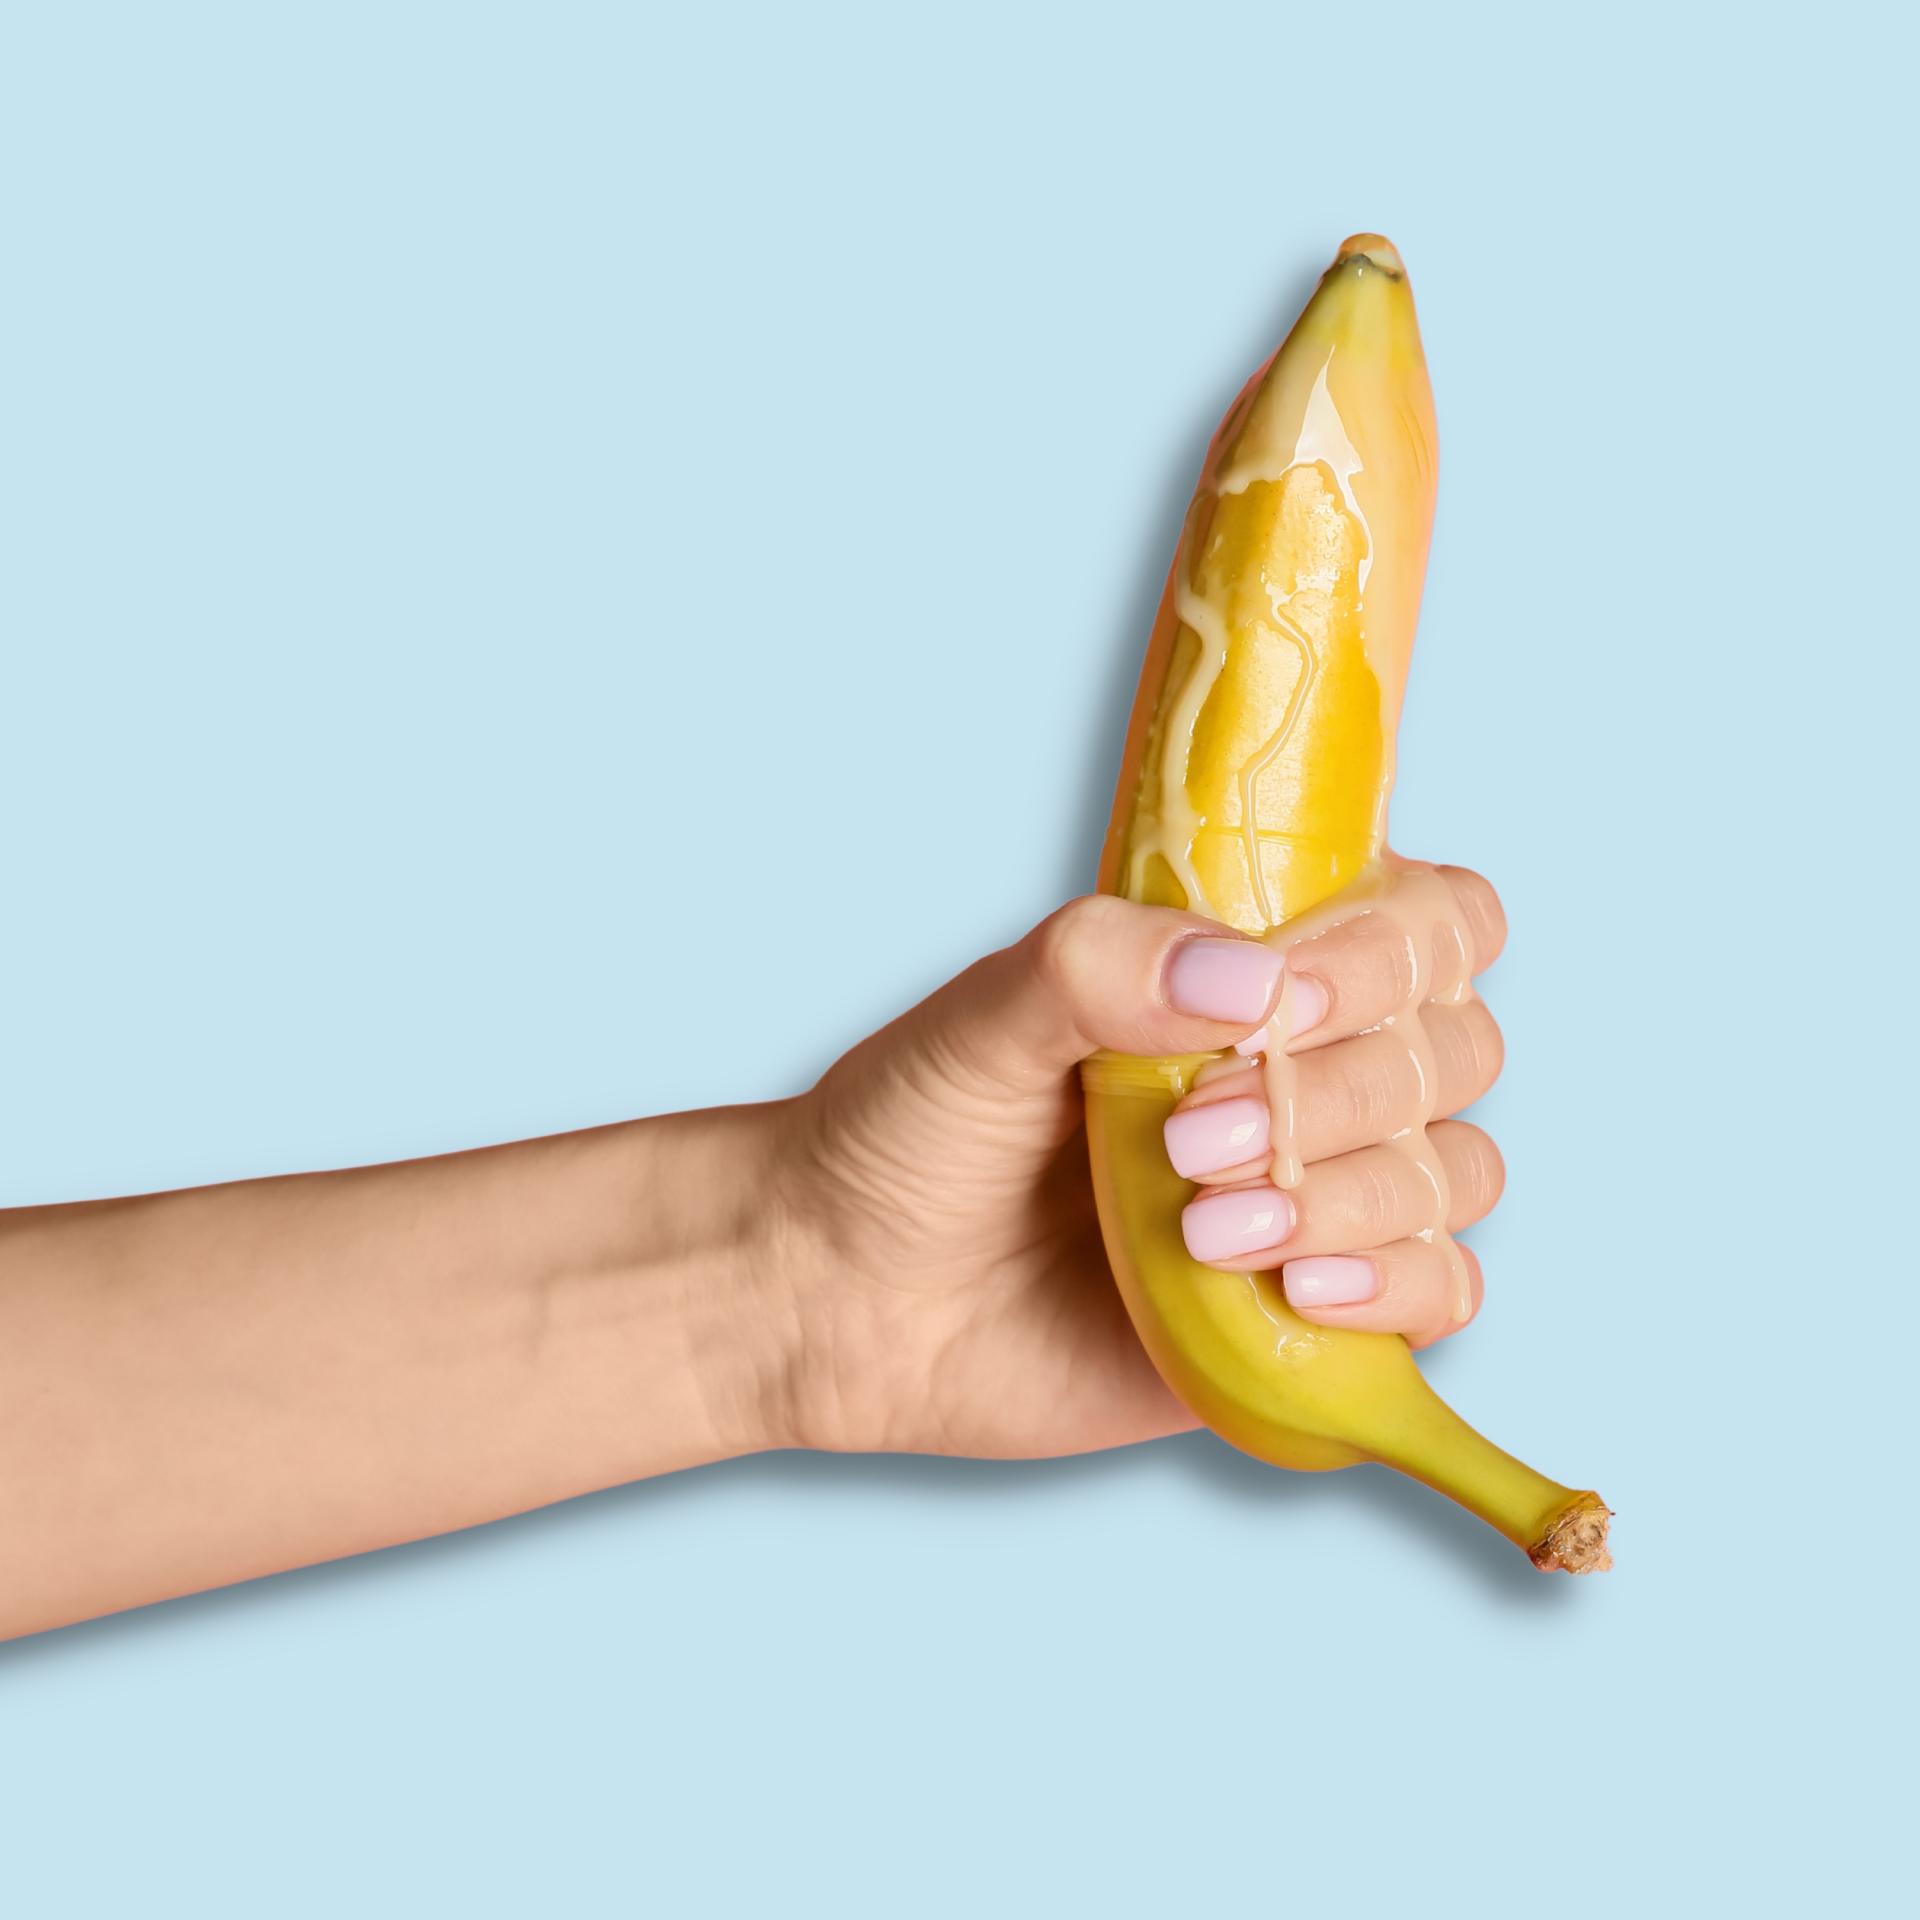 a photo of a woman's hand holding a banana dripping liquid from the end